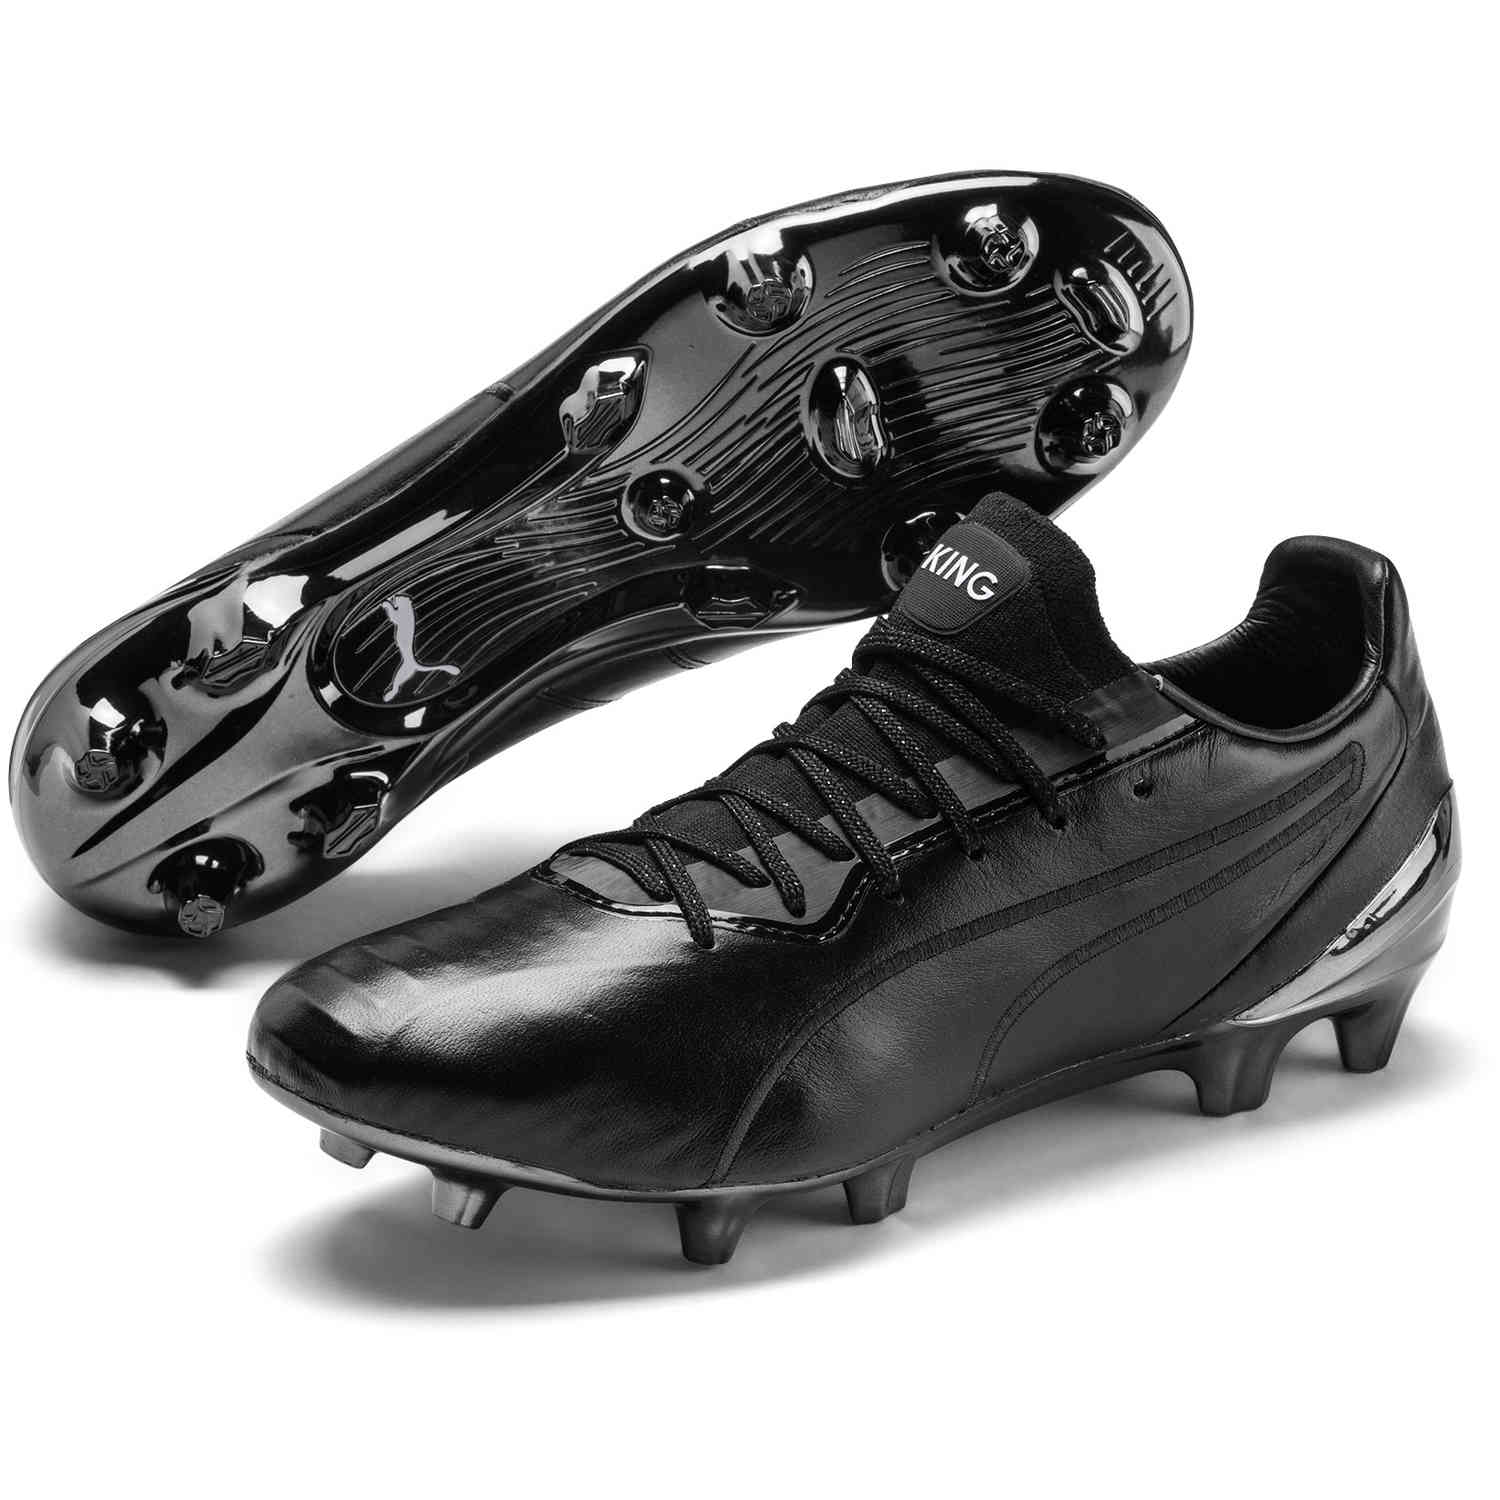 puma king soccer shoes,Save up to 18%,www.ilcascinone.com